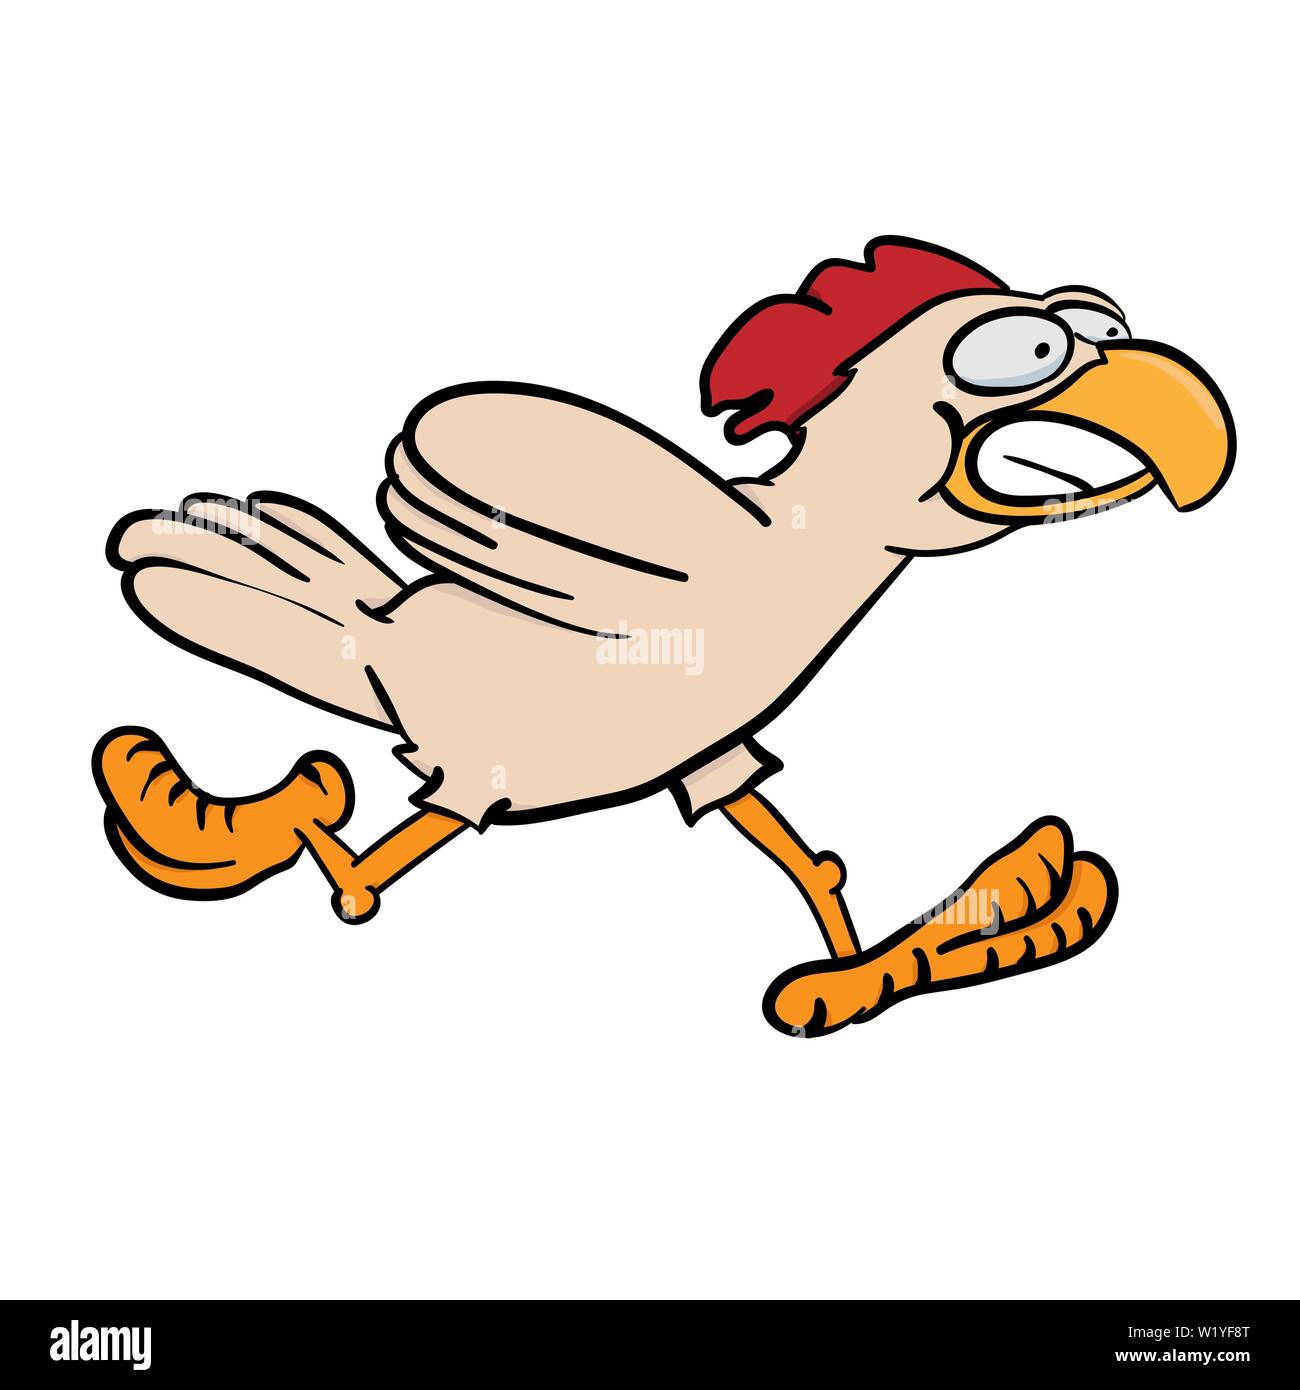 Funny Chicken Cartoon Pictures : Check out our cartoon chicken jpg ...